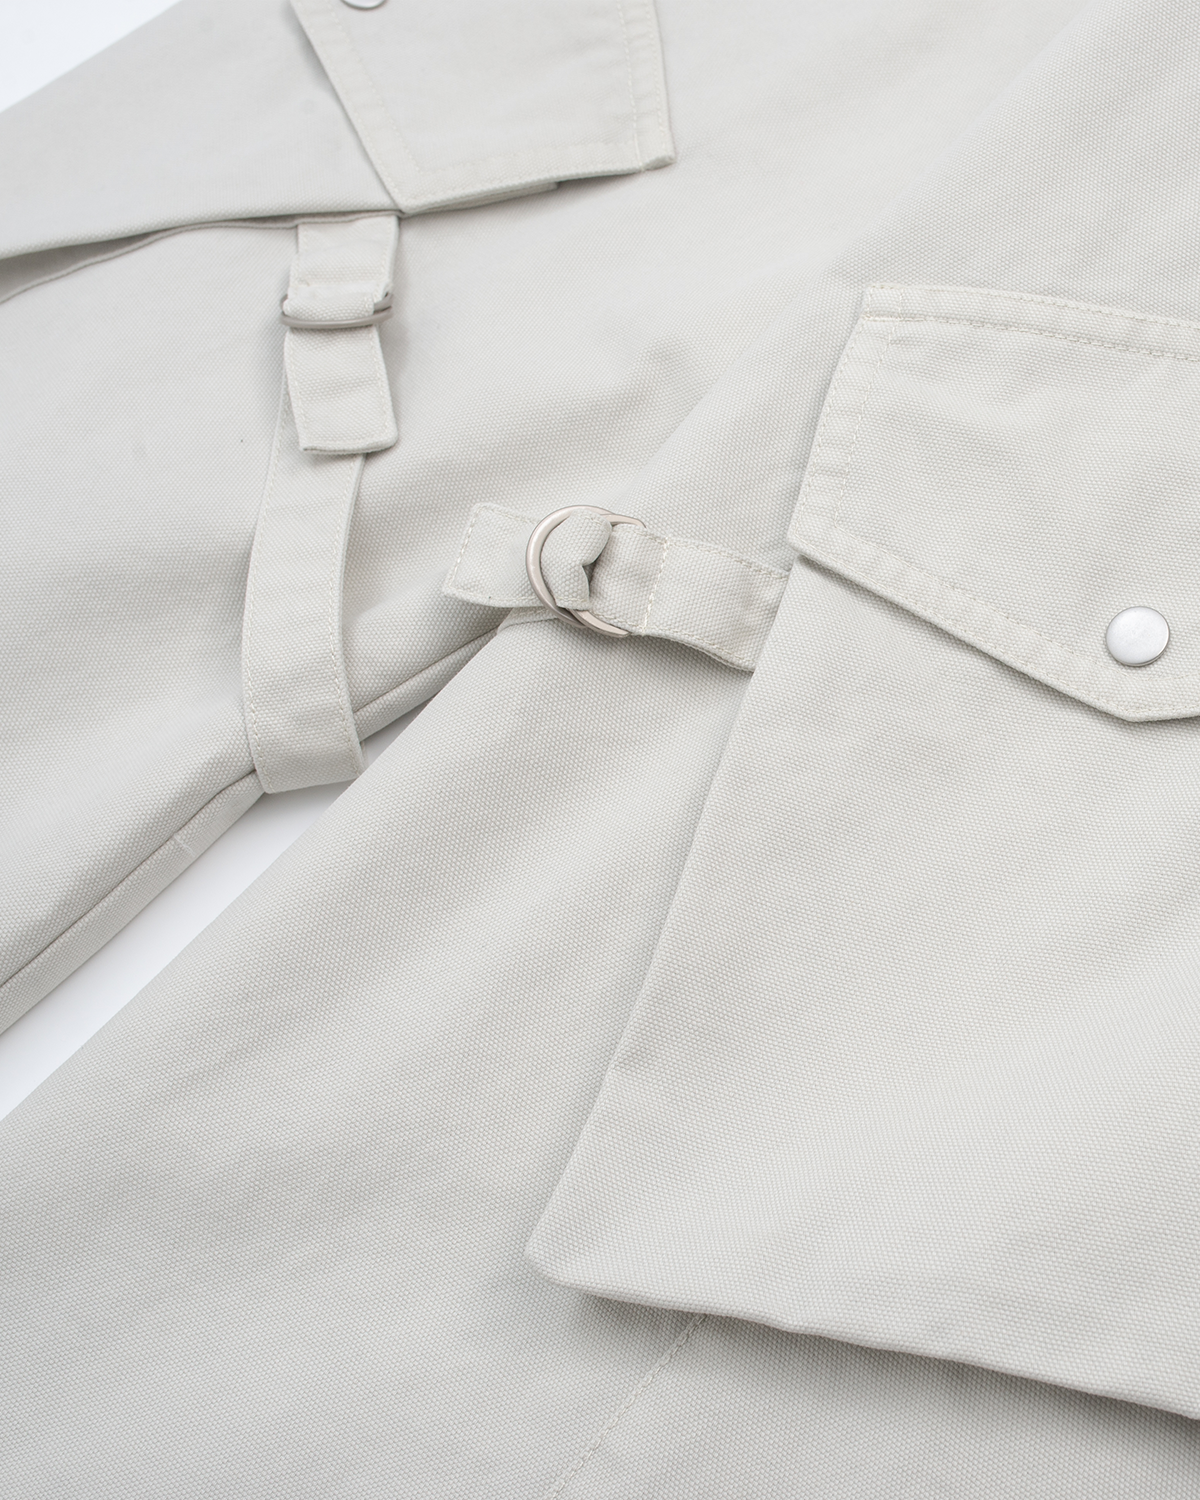 Off The Label cargo trouser greyish white